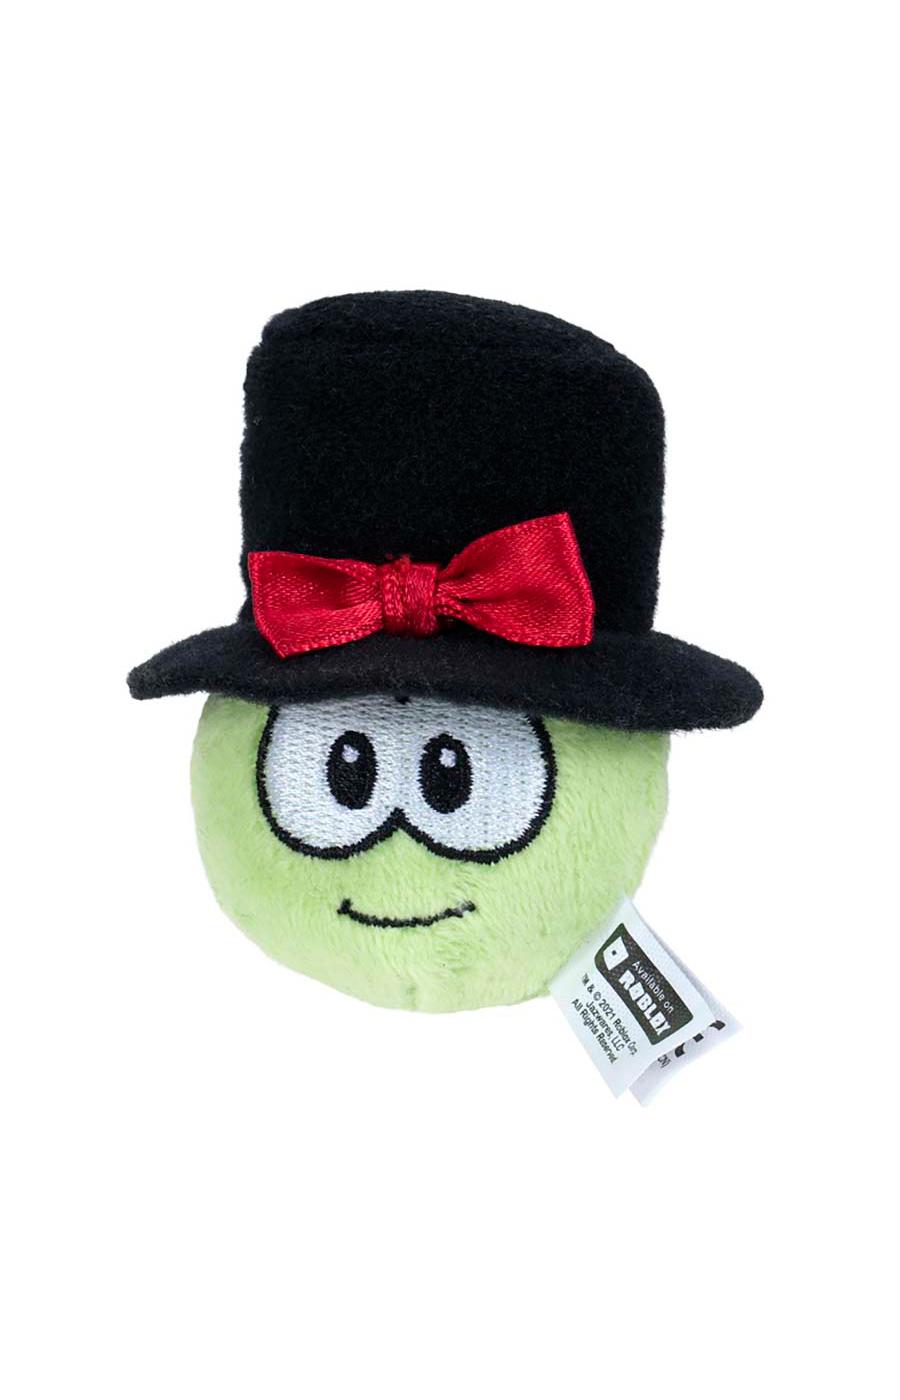 Meep City Micro Plush Mystery, available on Roblox; image 10 of 13